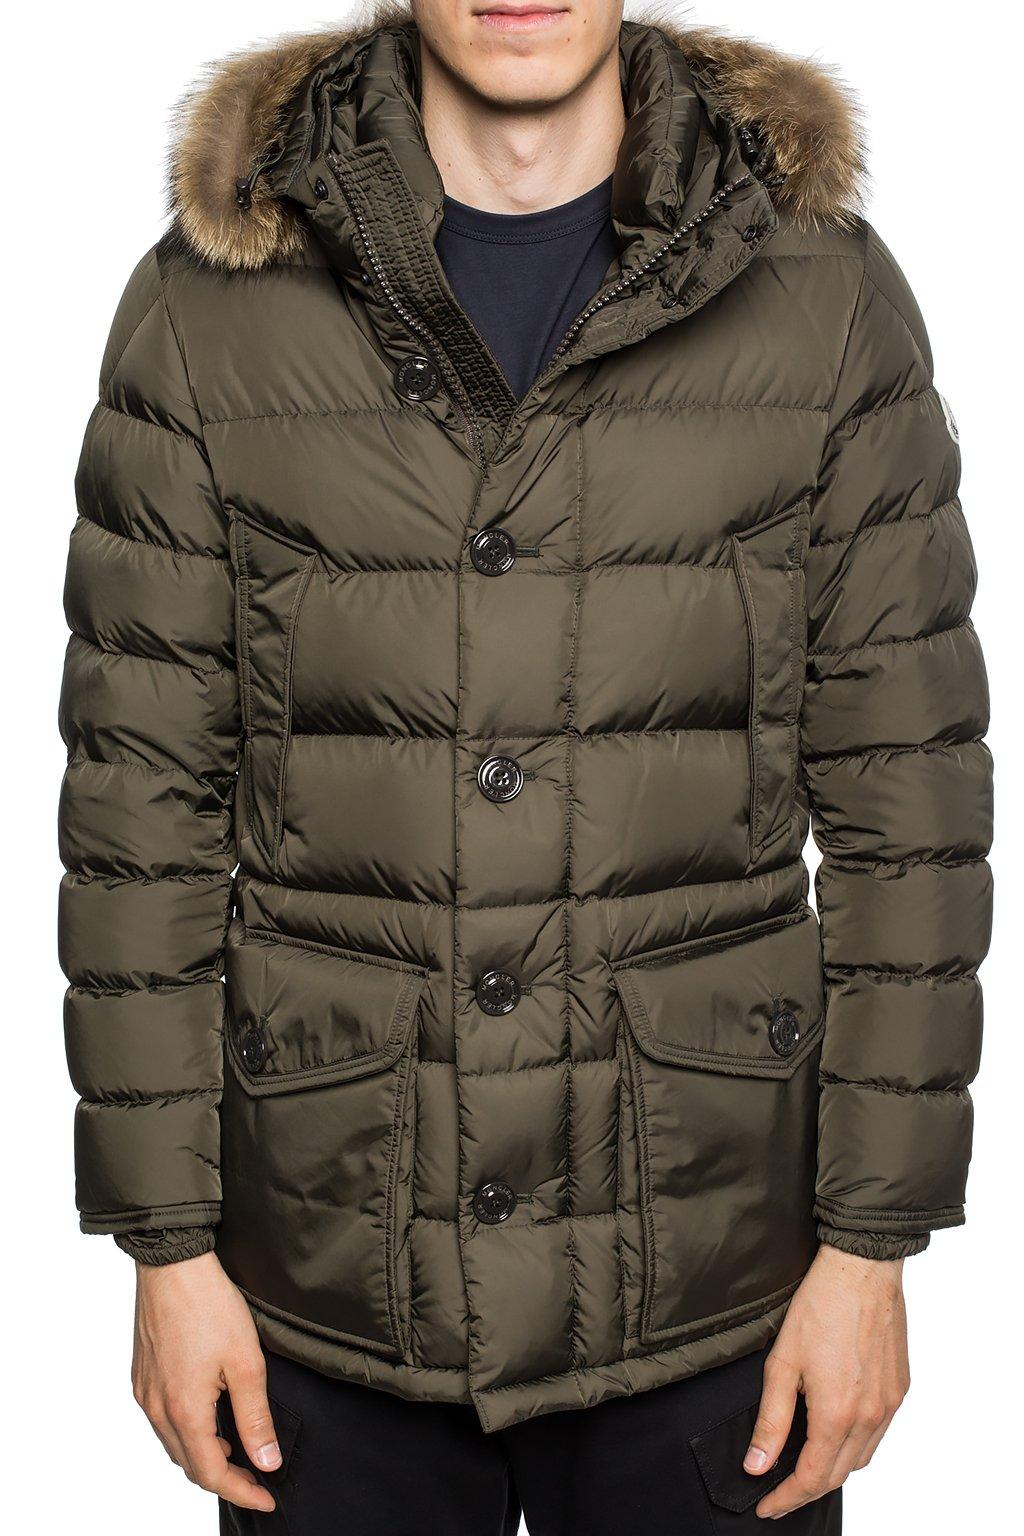 moncler cluny hooded down jacket Off 78% - www.loverethymno.com